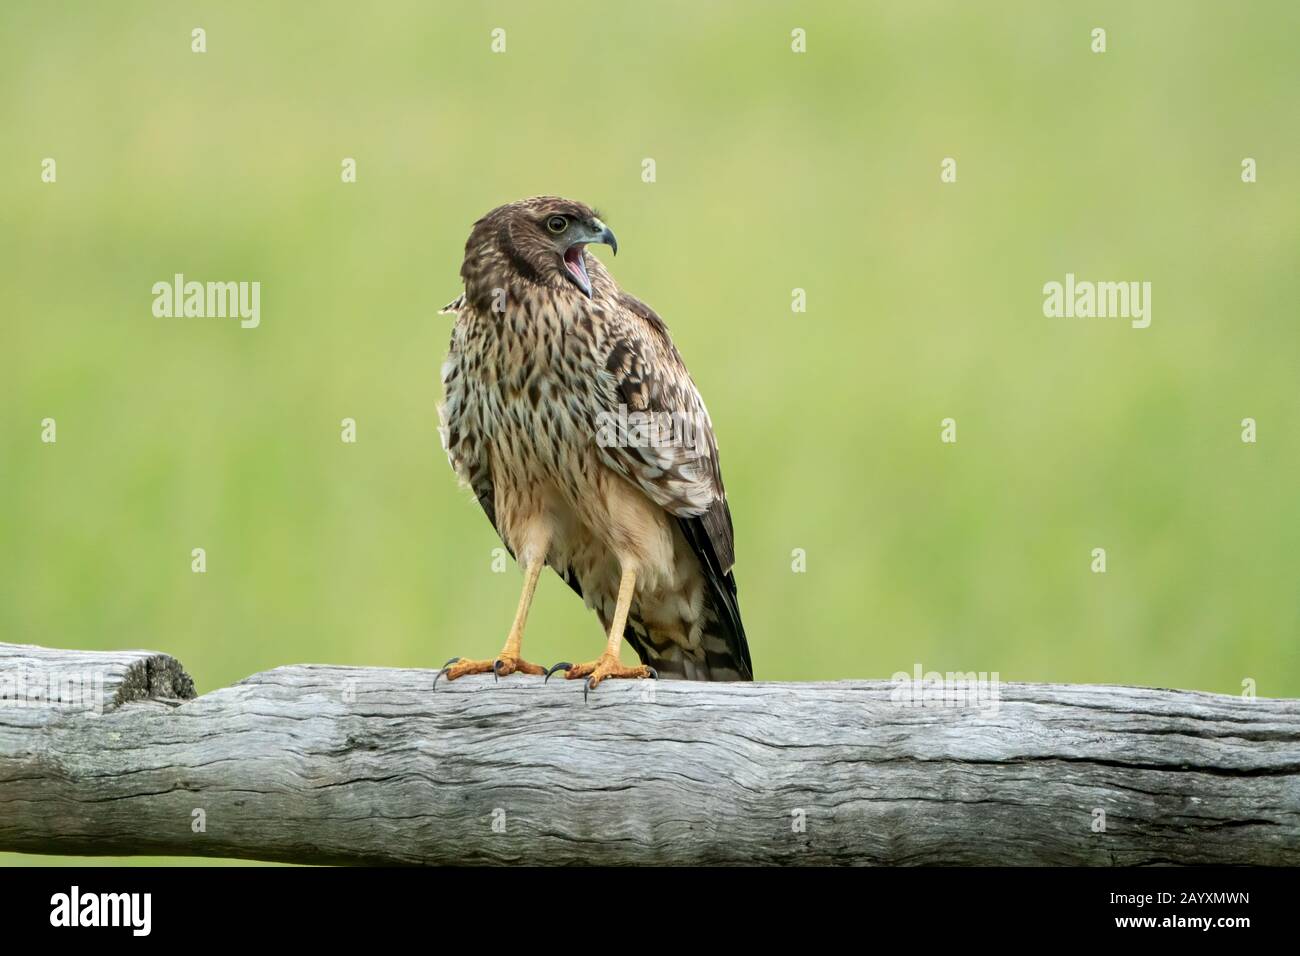 spotted harrier, Circus assimilis, young bird perched on fencepost, Atherton Tablelands, Queensland, Australia 9 January 2020 Stock Photo